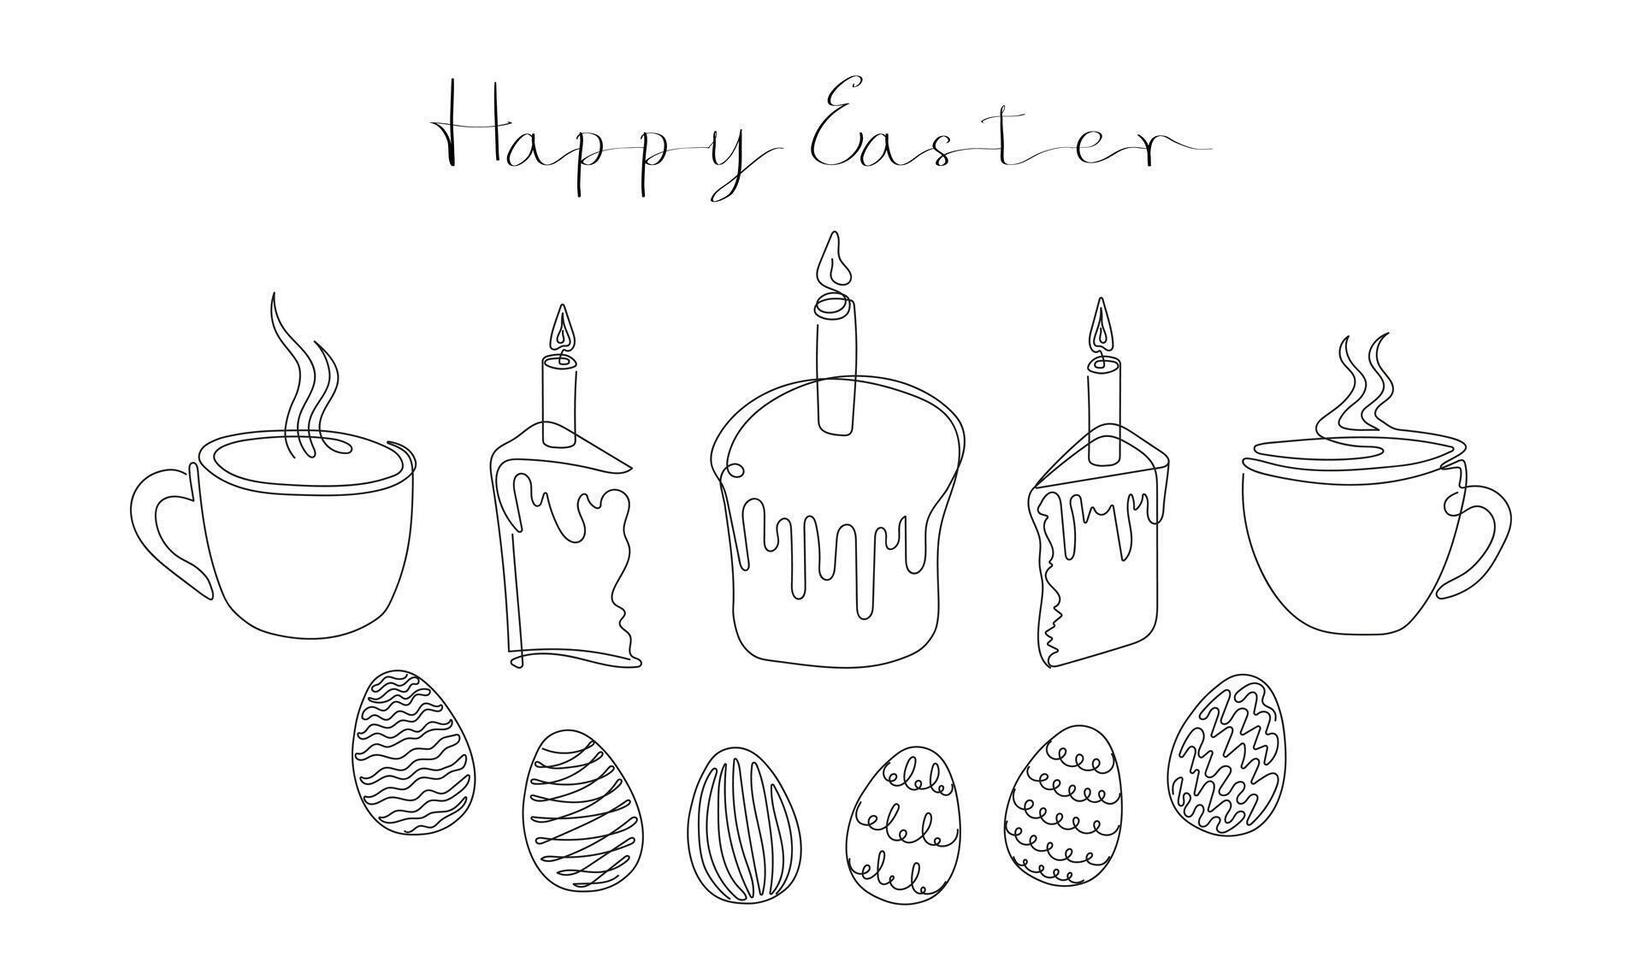 Easter Set in continuous one line style with design elements like Easter cakes with lit candles, painted eggs, steaming mugs with tea or coffee. Happy Easter greeting. Festive food. Black and white vector